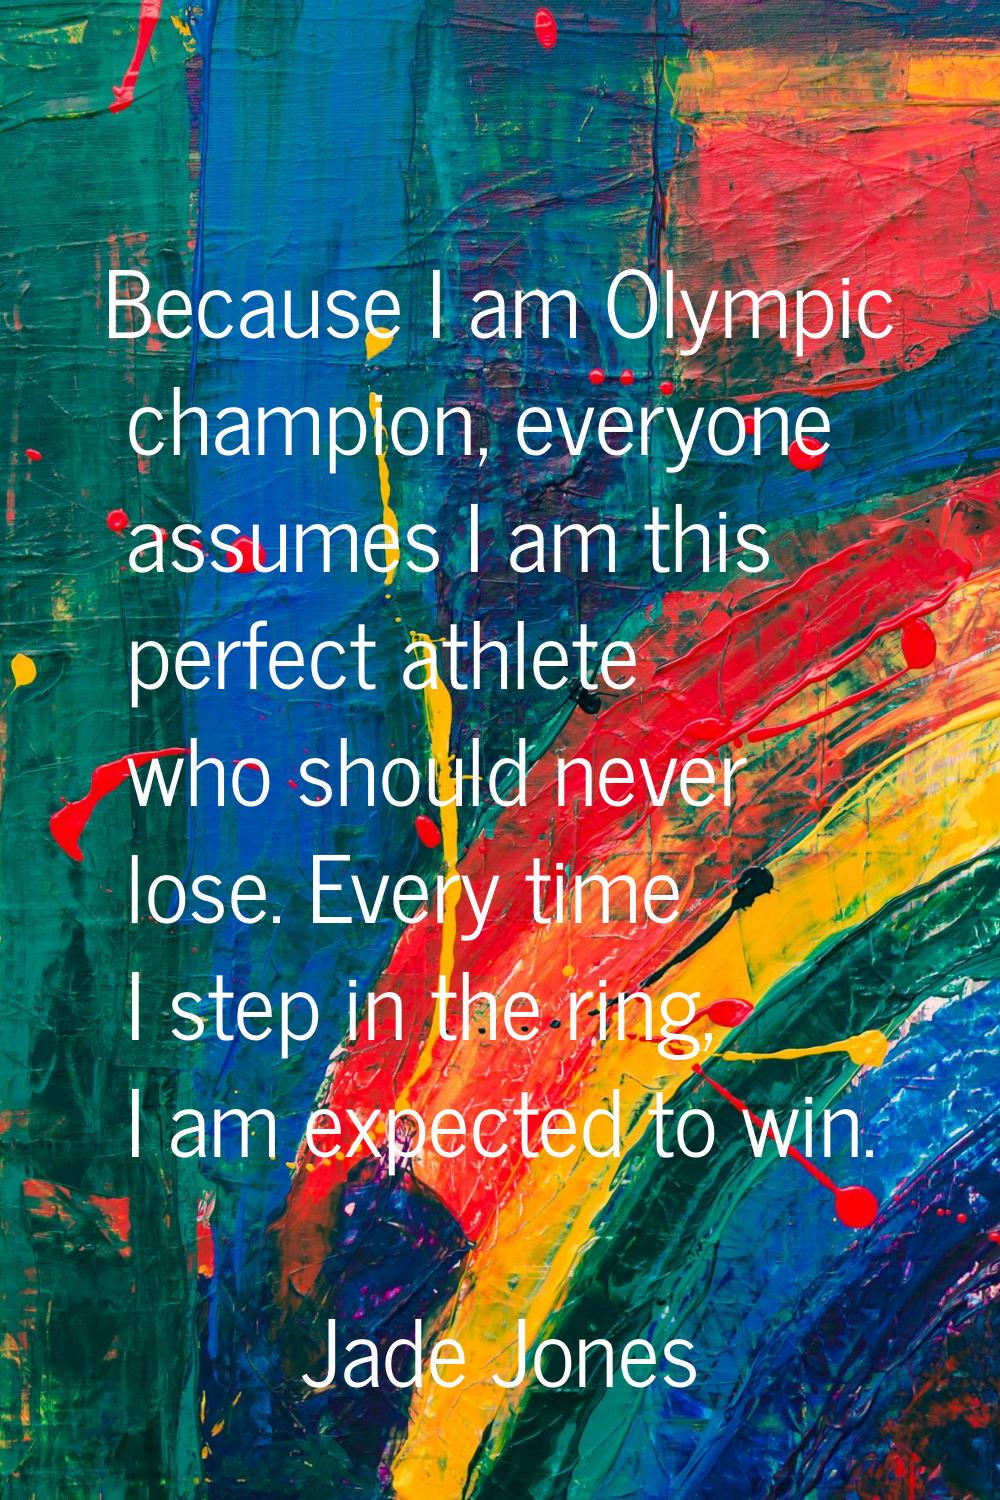 Because I am Olympic champion, everyone assumes I am this perfect athlete who should never lose. Ev